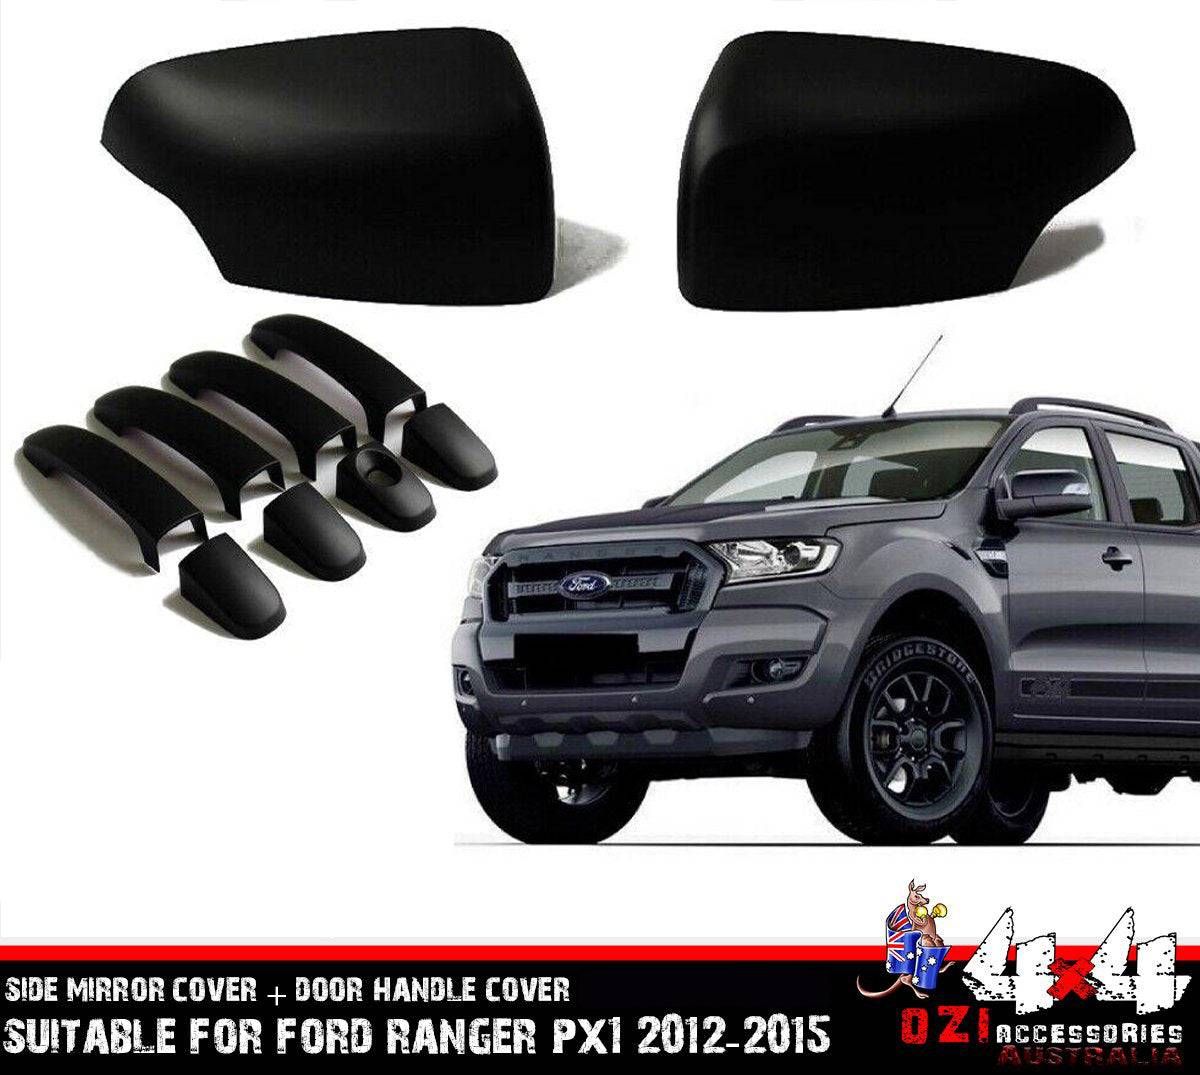 Black Out Kit Suits Ford Ranger PX1 (Online Only) - OZI4X4 PTY LTD